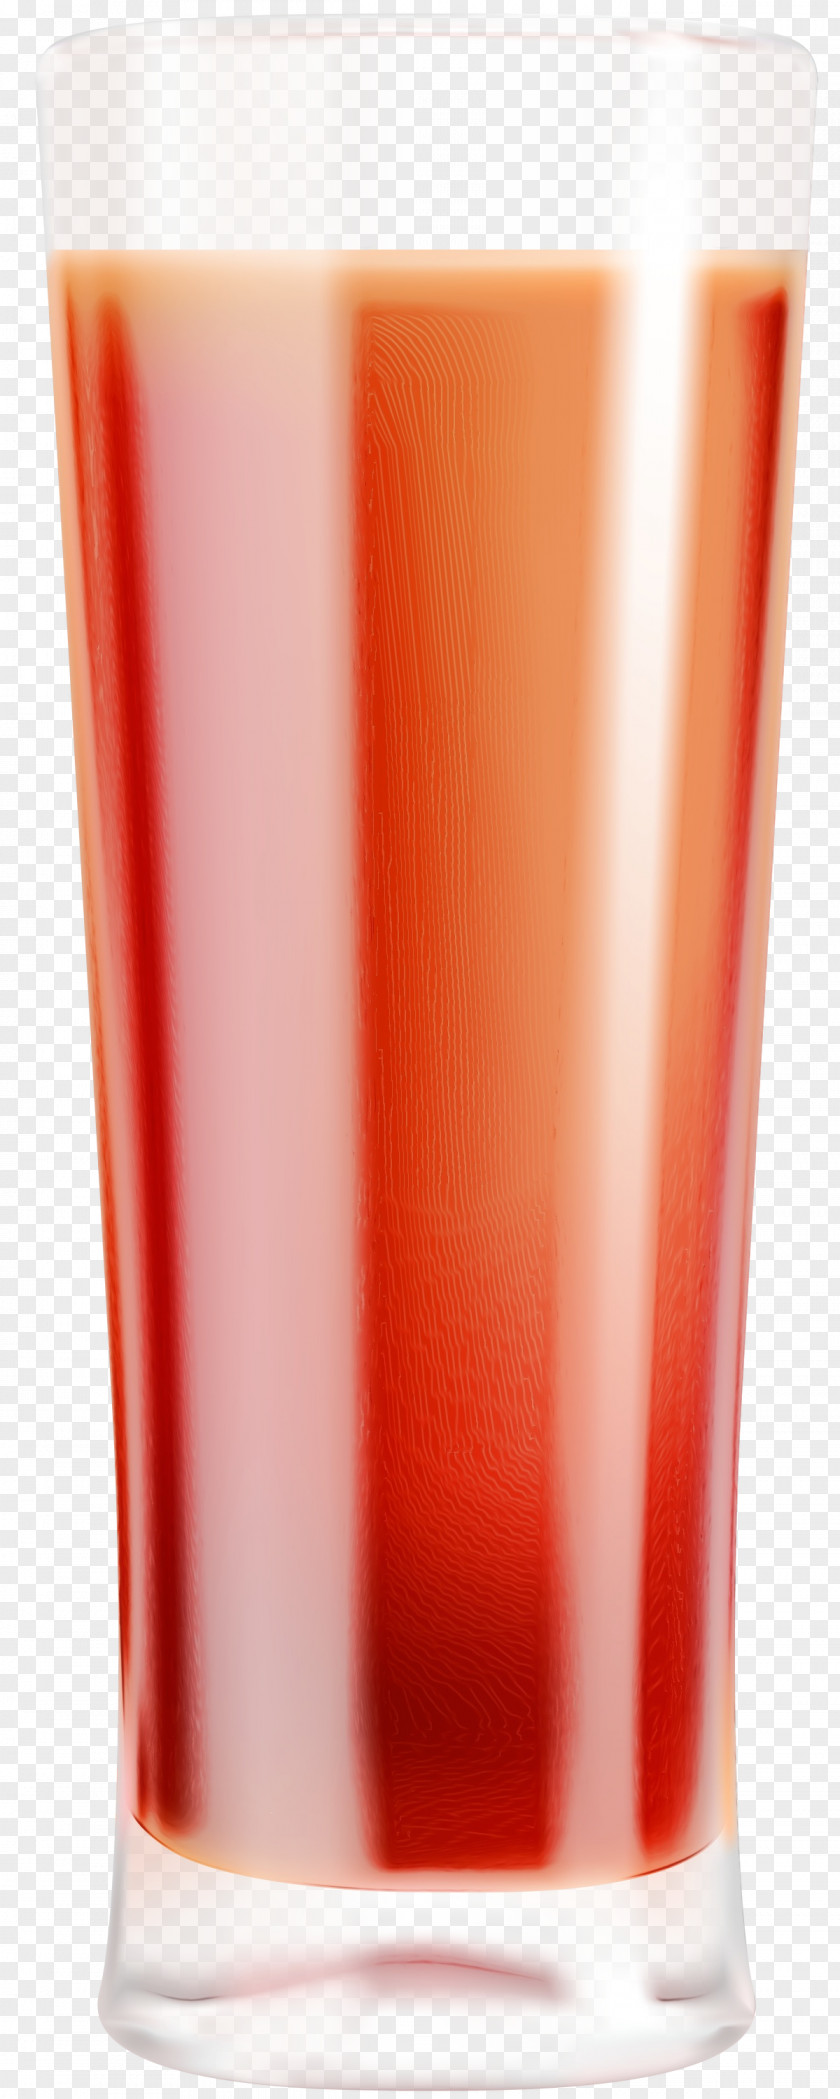 Pint Glass Drink Material Property Tumbler Drinkware Cylinder PNG